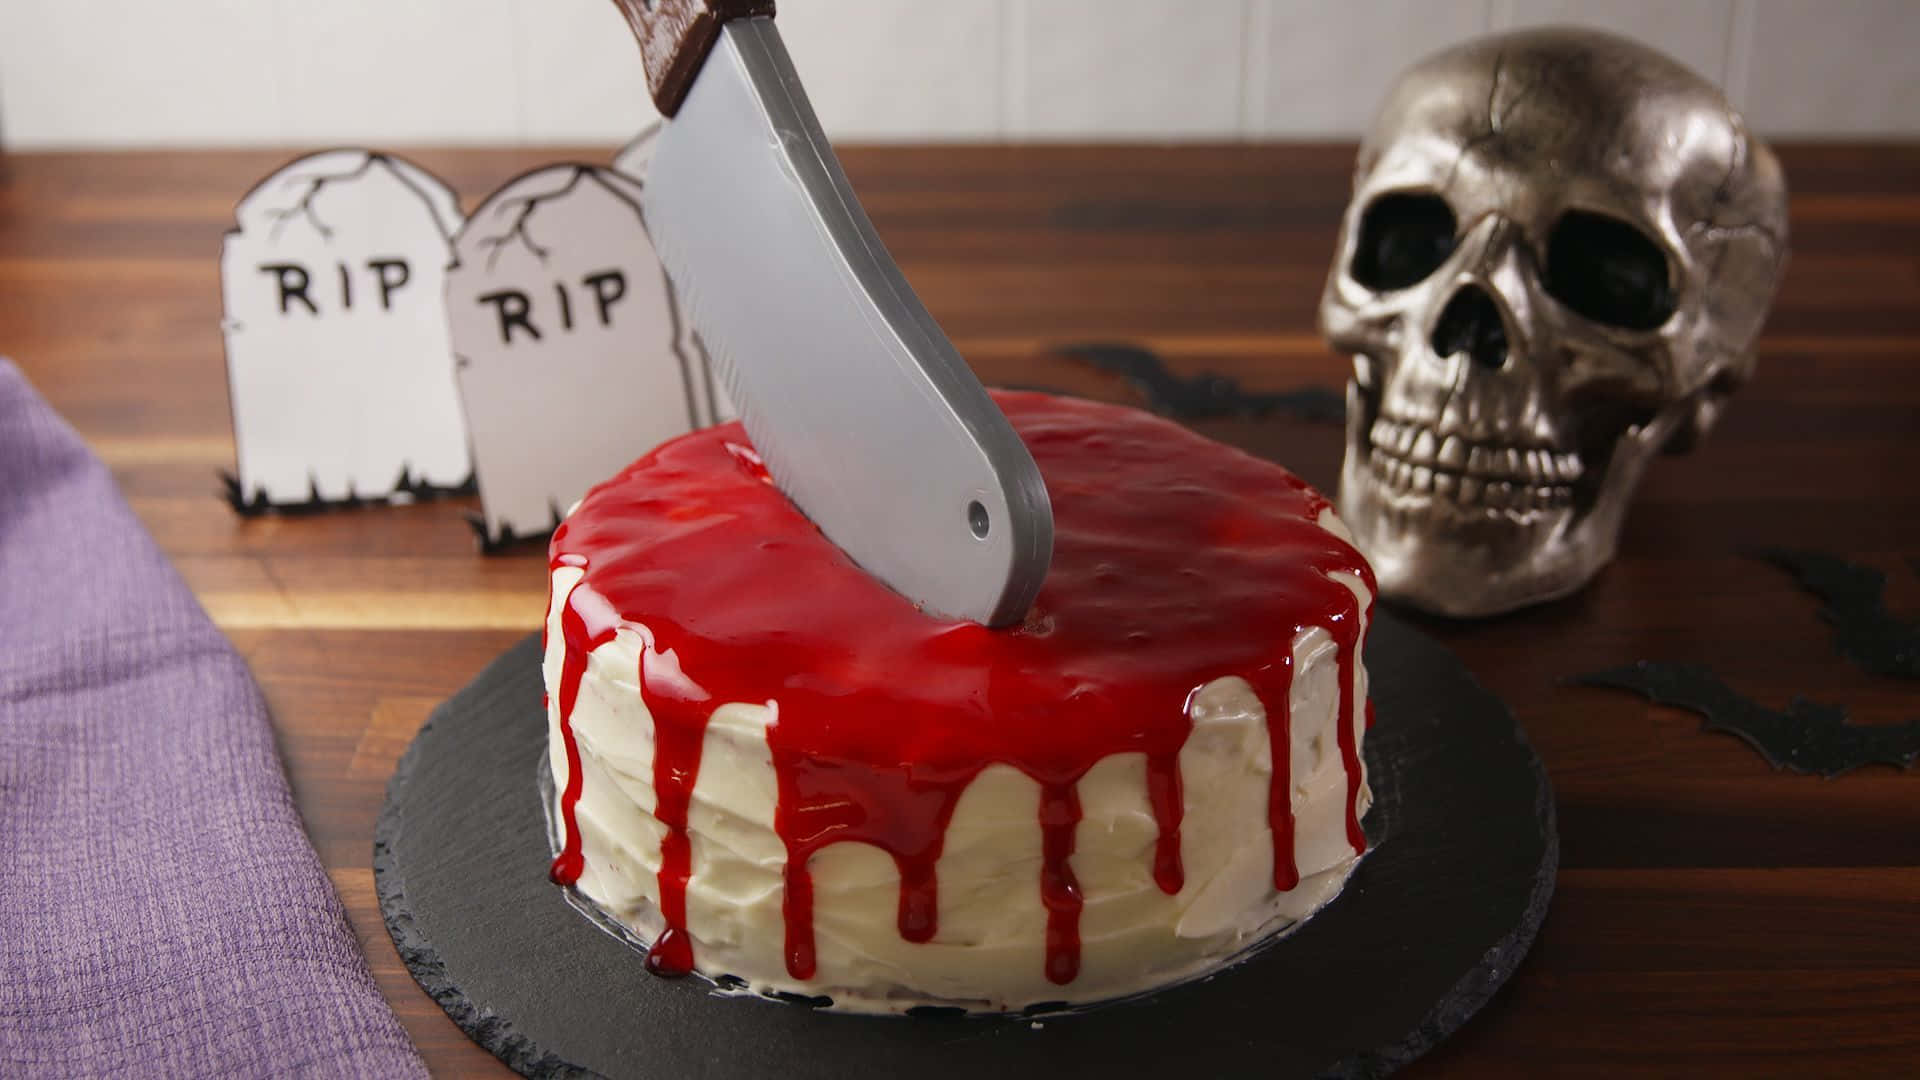 Decorate your next Halloween bash with this tasty and spook-tacular cake! Wallpaper